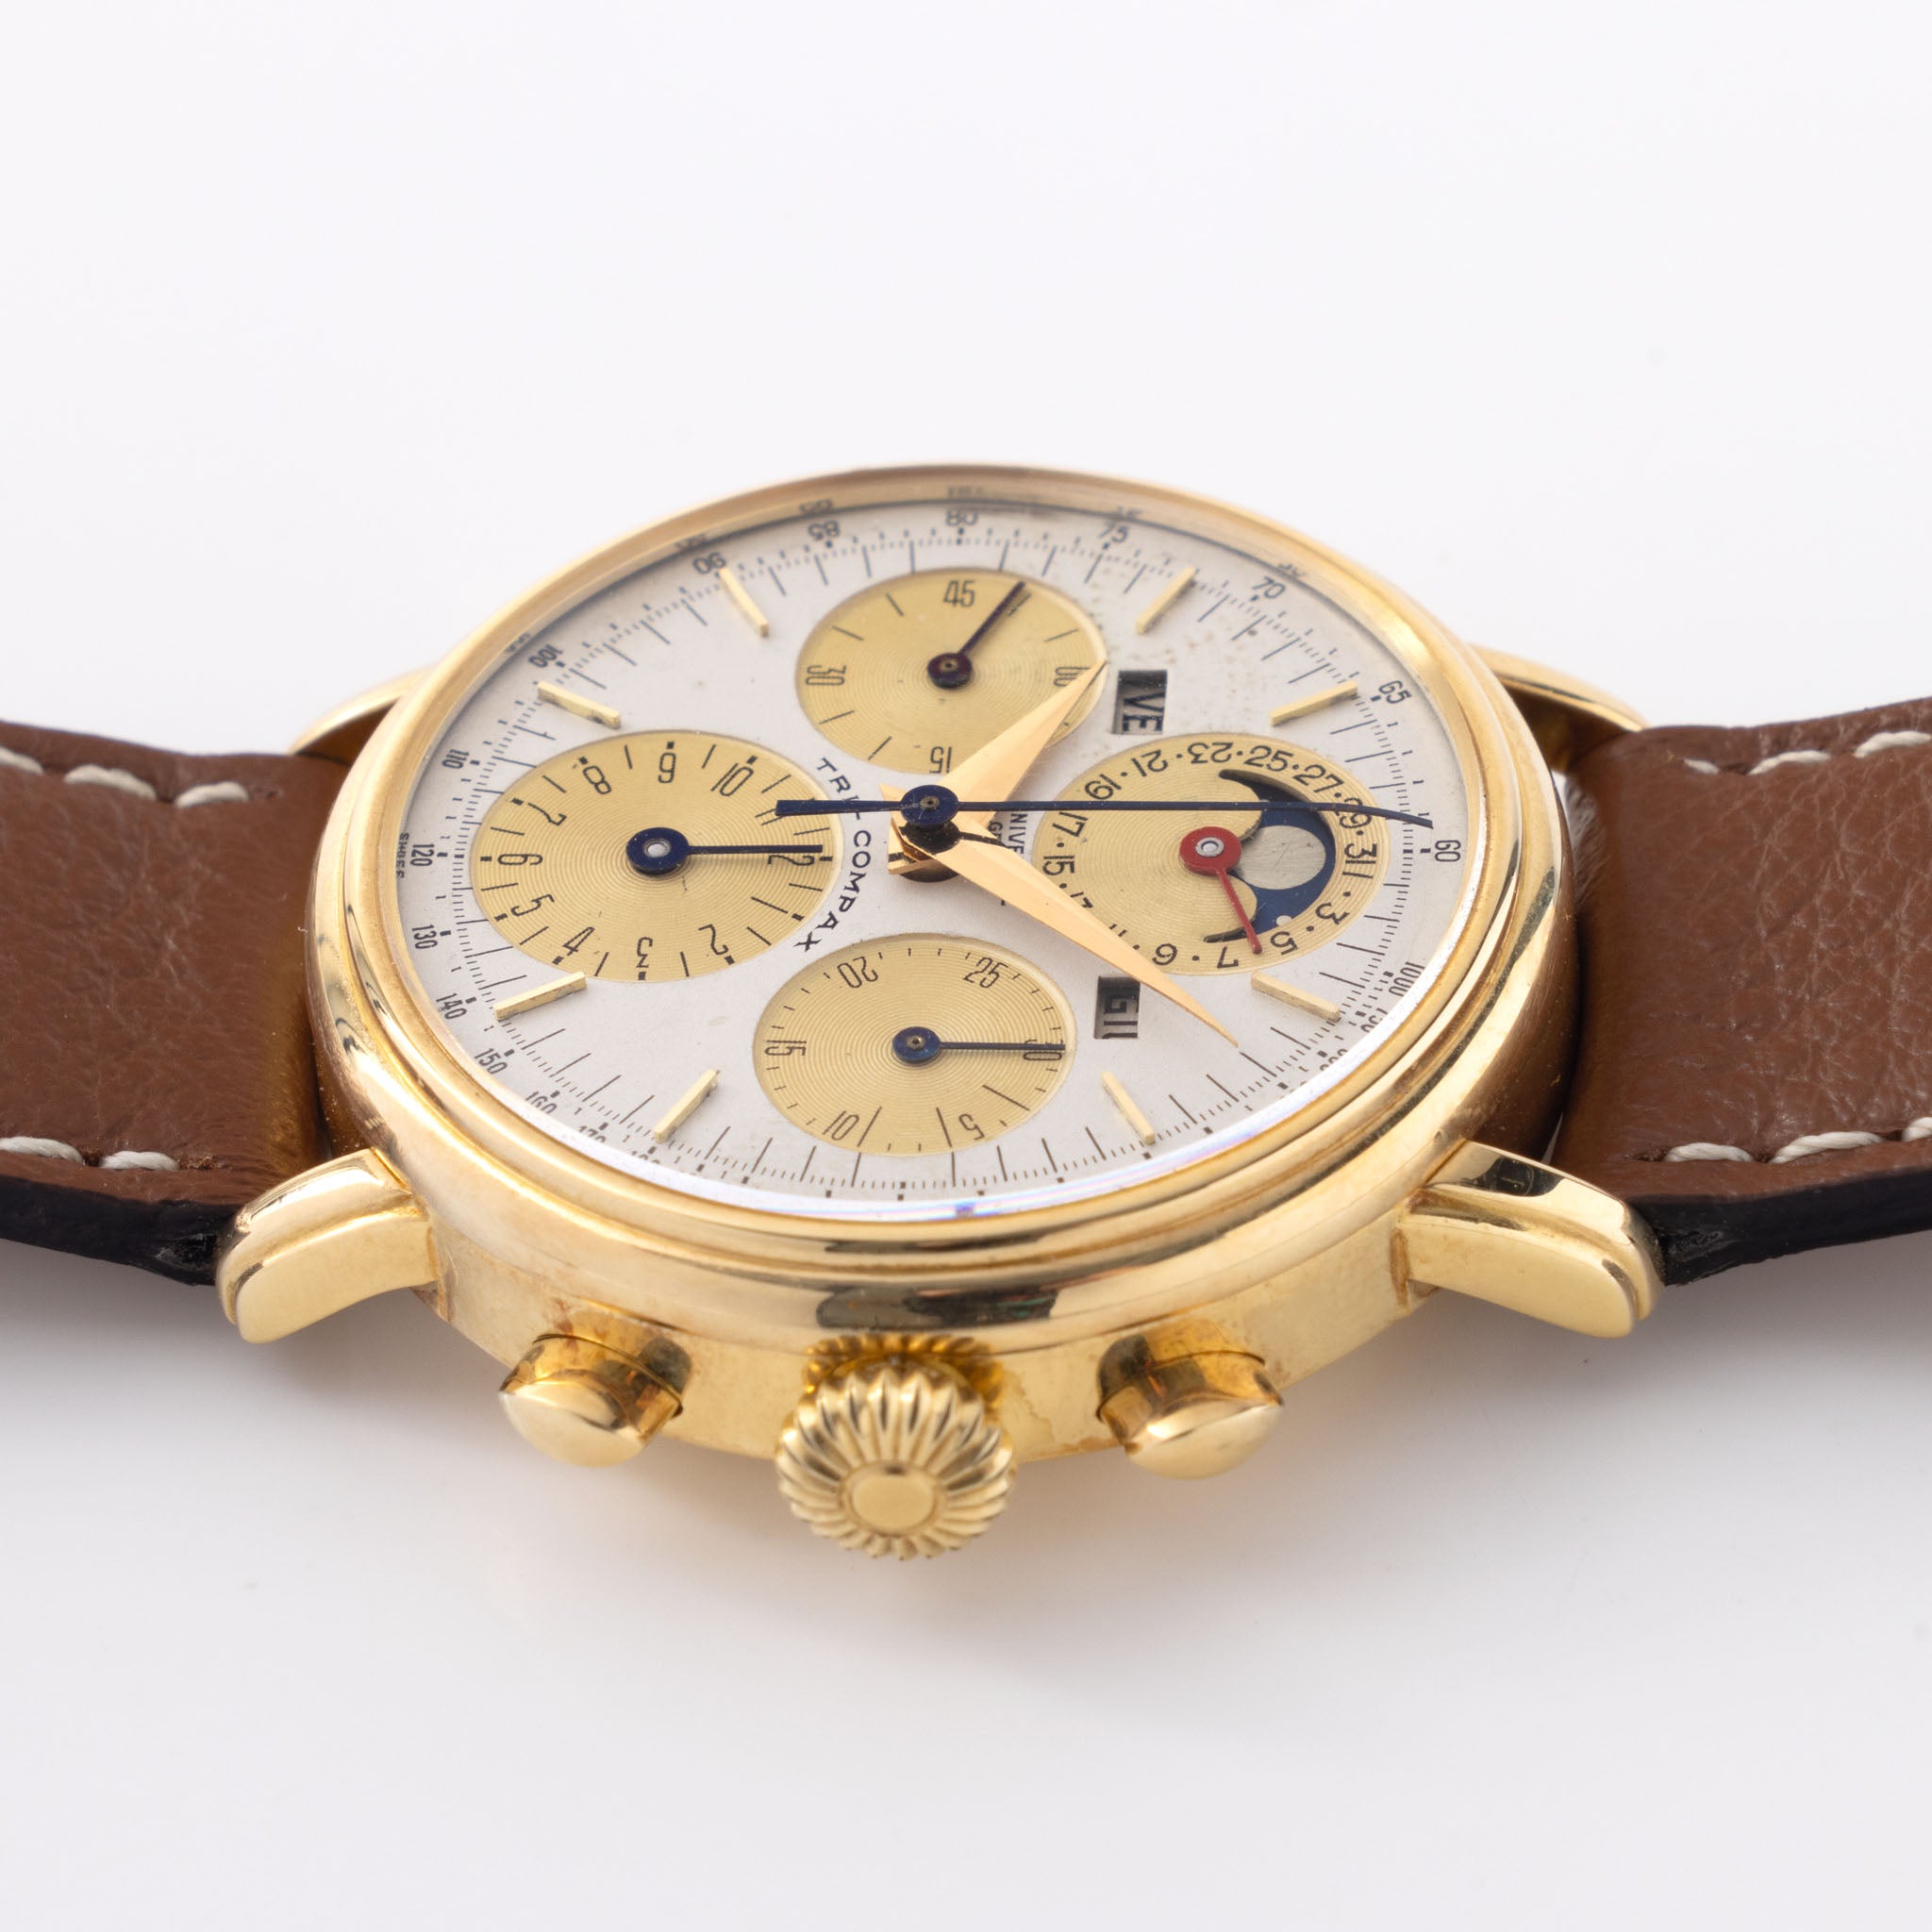 Universal Genève Tri-Compax in 18k Yellow Gold with Original Box and Guarantee Paper Ref 1.281.100